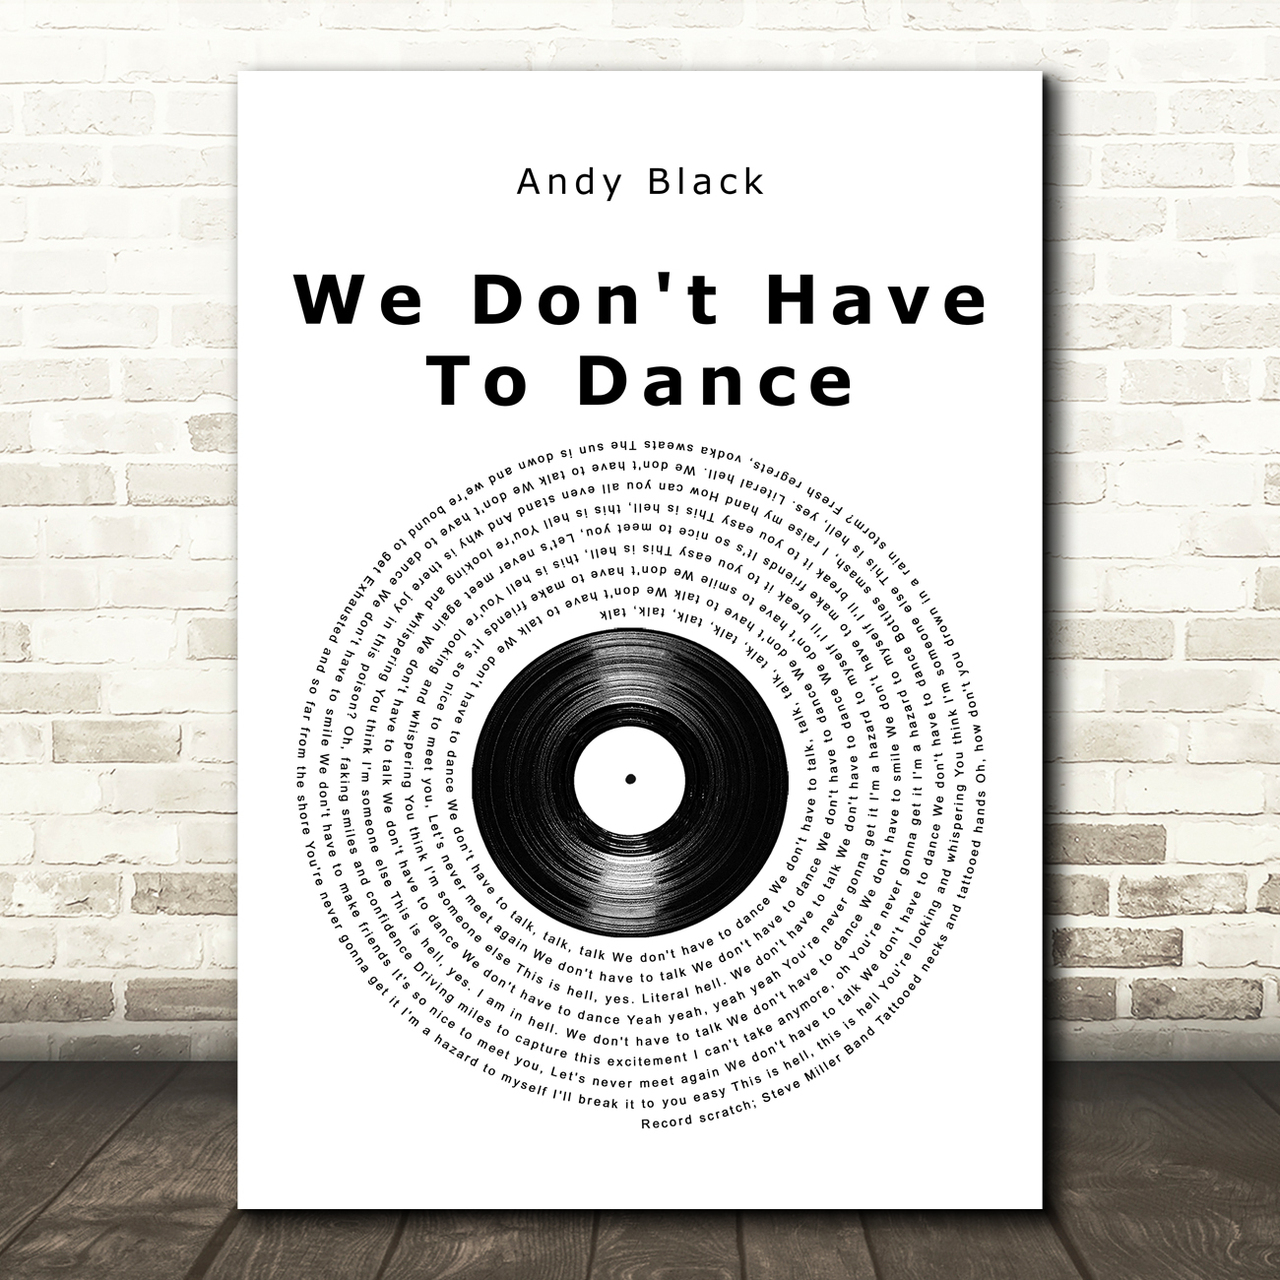 Andy Black We Don't Have To Dance Vinyl Record Song Lyric Art Print